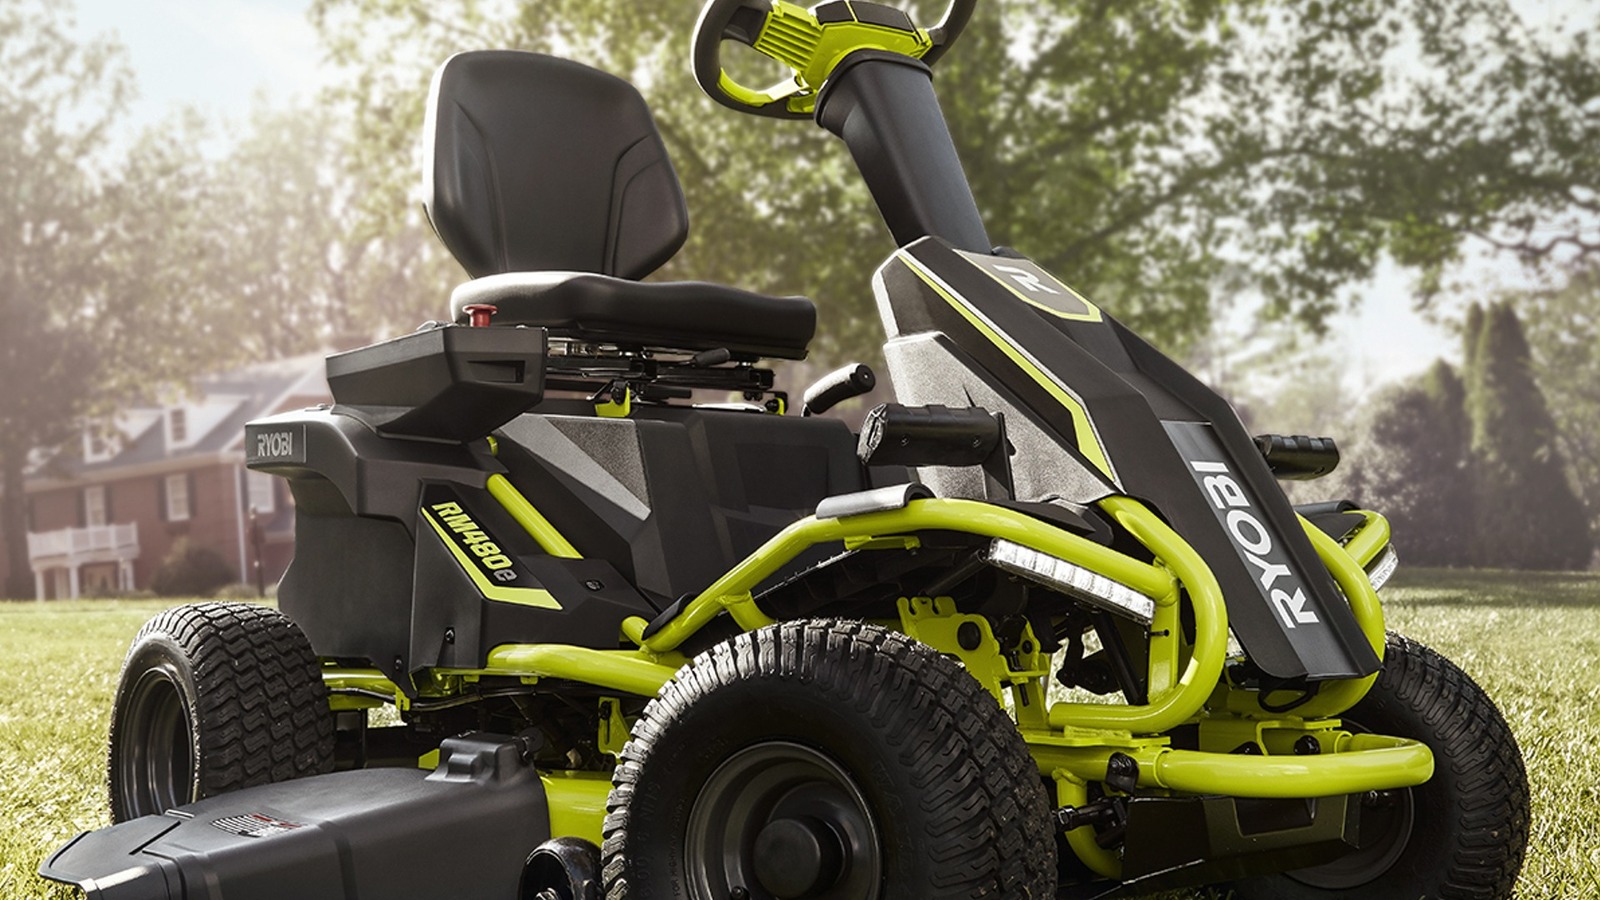 How Long Do The Batteries Last In Ryobi's RM480E Electric Riding Lawn Mower?